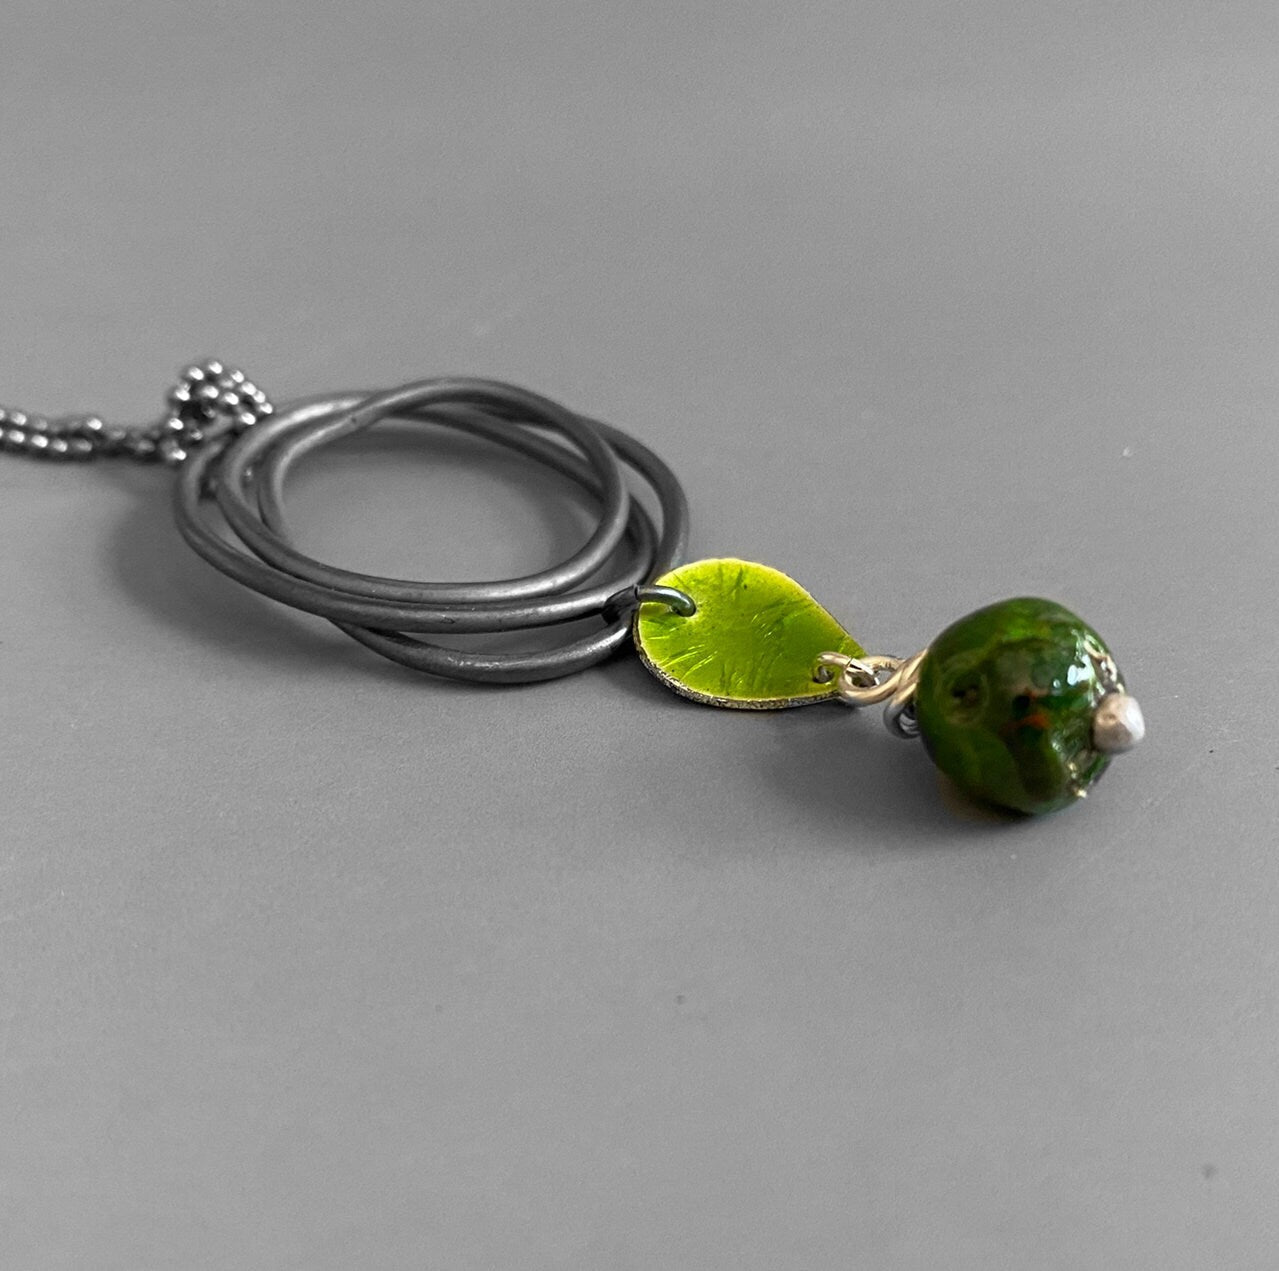 Oxidised Silver Pendant with Torch Fired Beads , Geometric Jewellery, Green Enamel Necklace - MaisyPlum